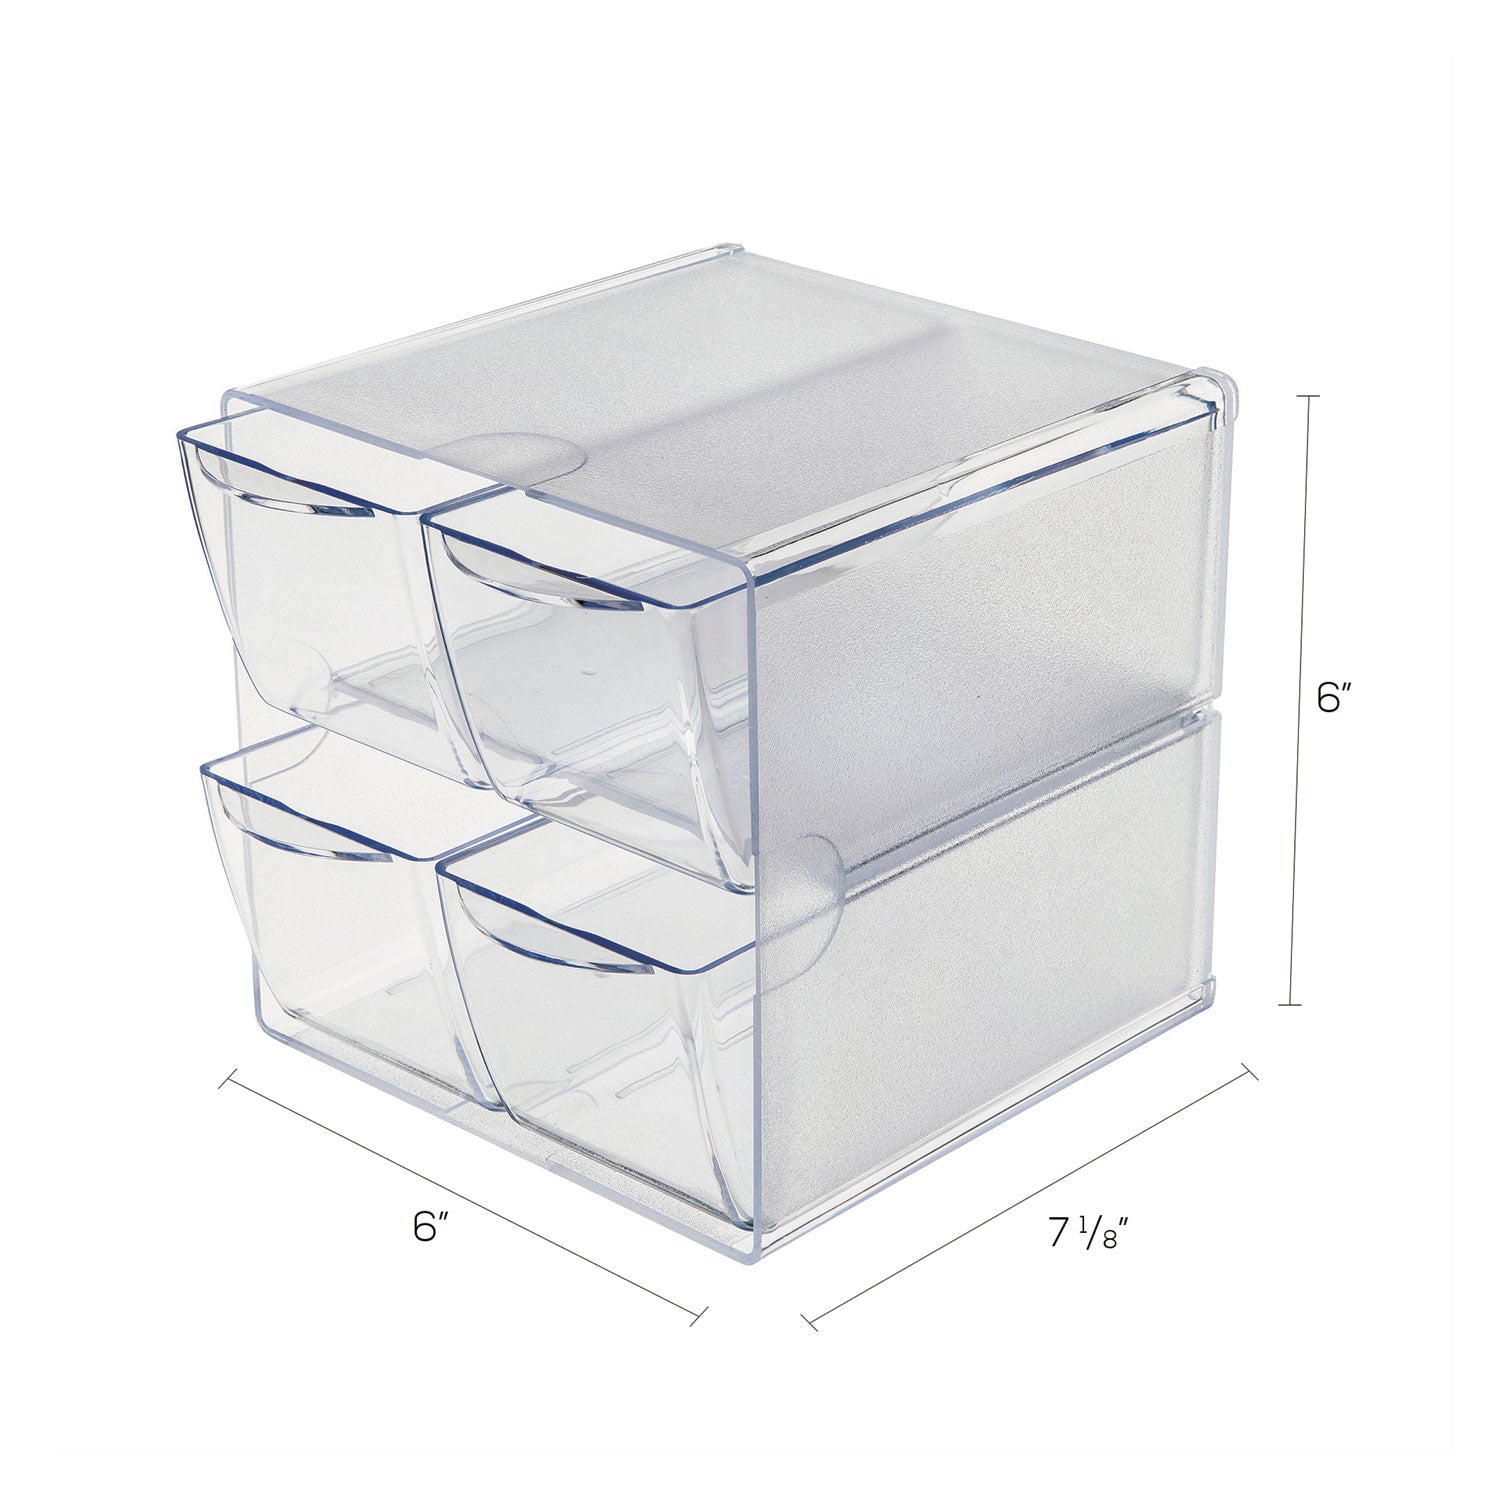 Stackable Cube Organizer, 4 Compartments, 4 Drawers, Plastic, 6 x 7.2 x 6, Clear